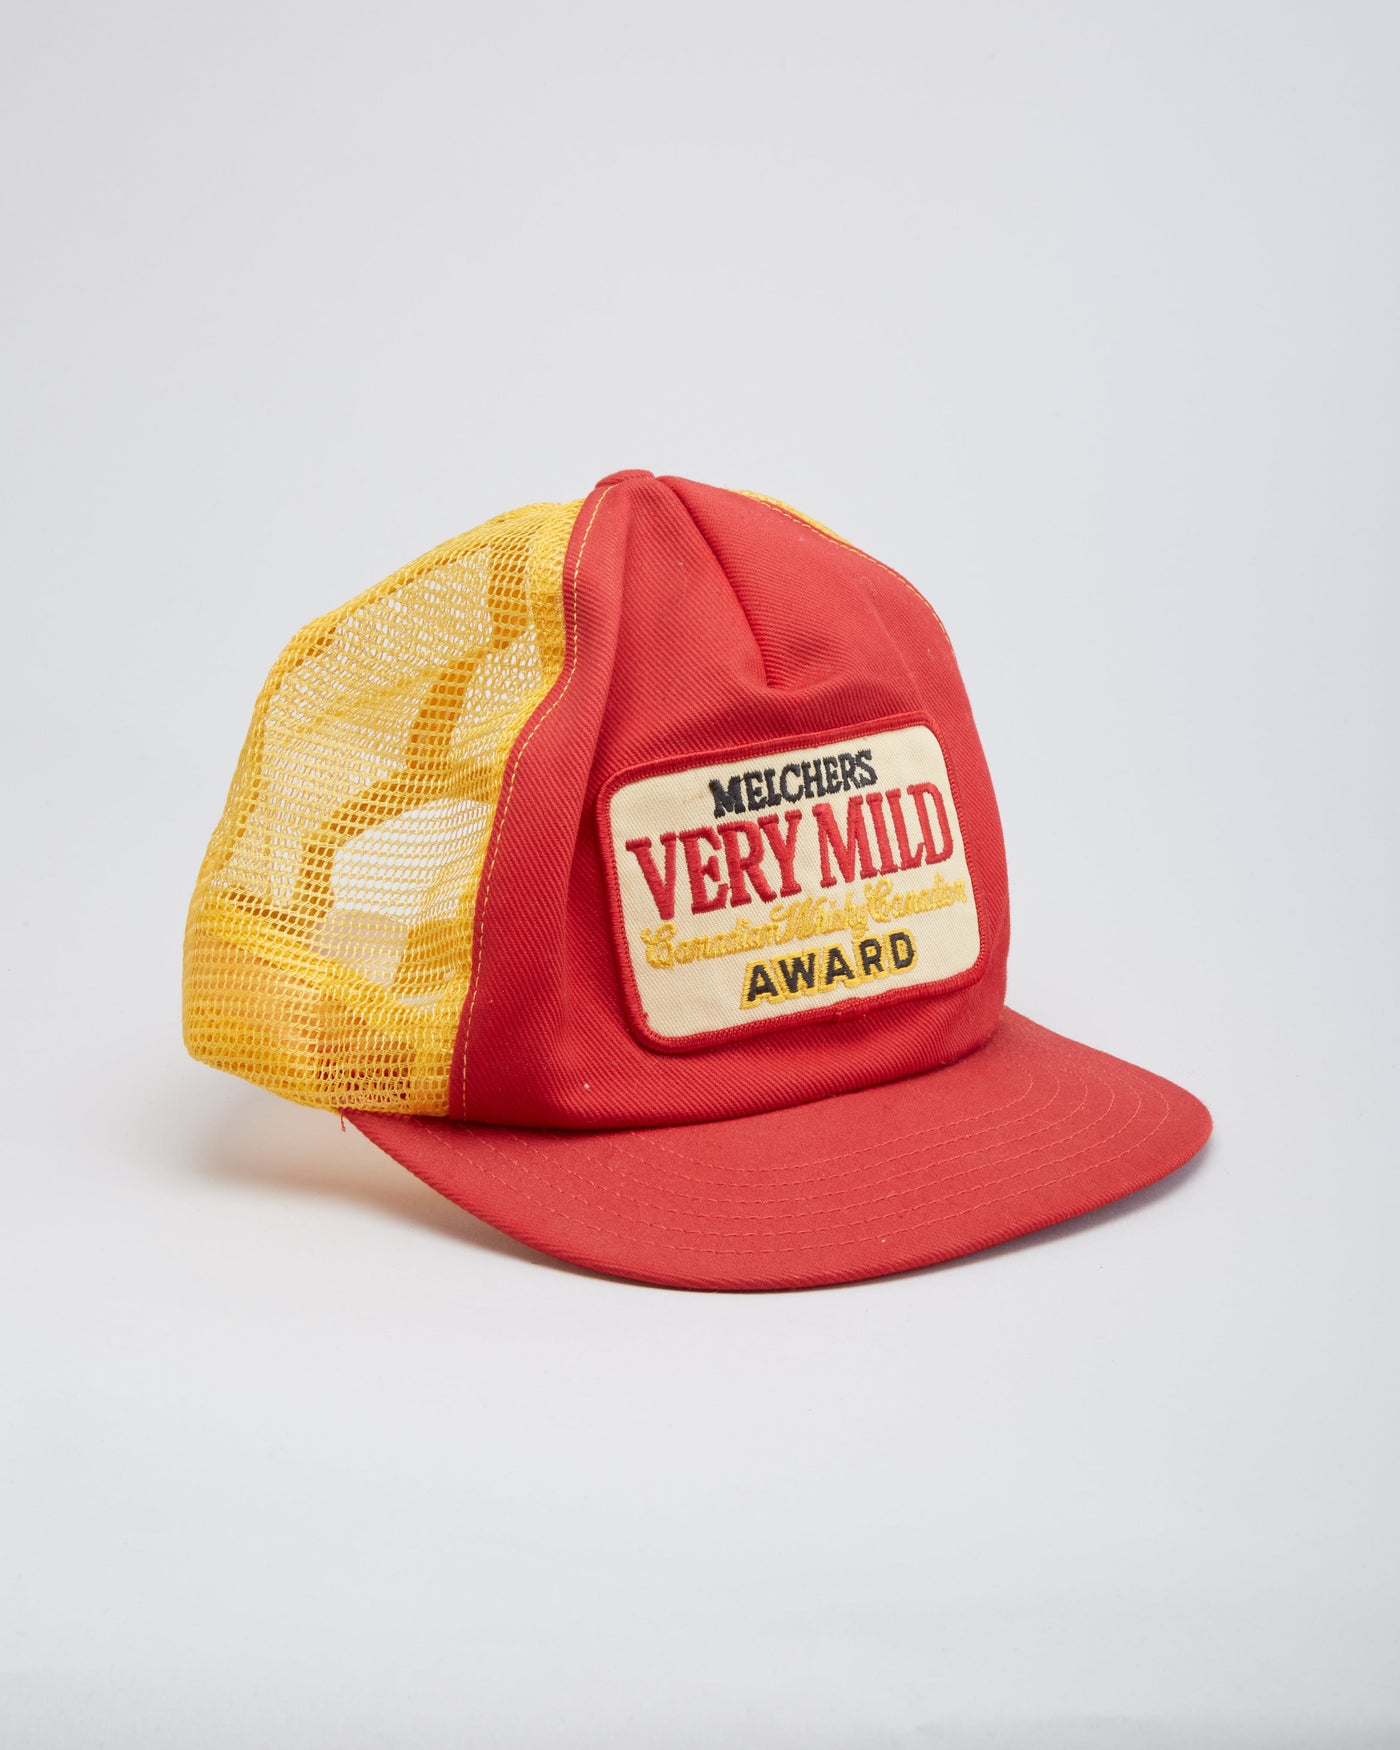 Vintage 80s Melchers Very Mild Canadian Whiskey Award Red / Yellow Snapback Trucker Hat